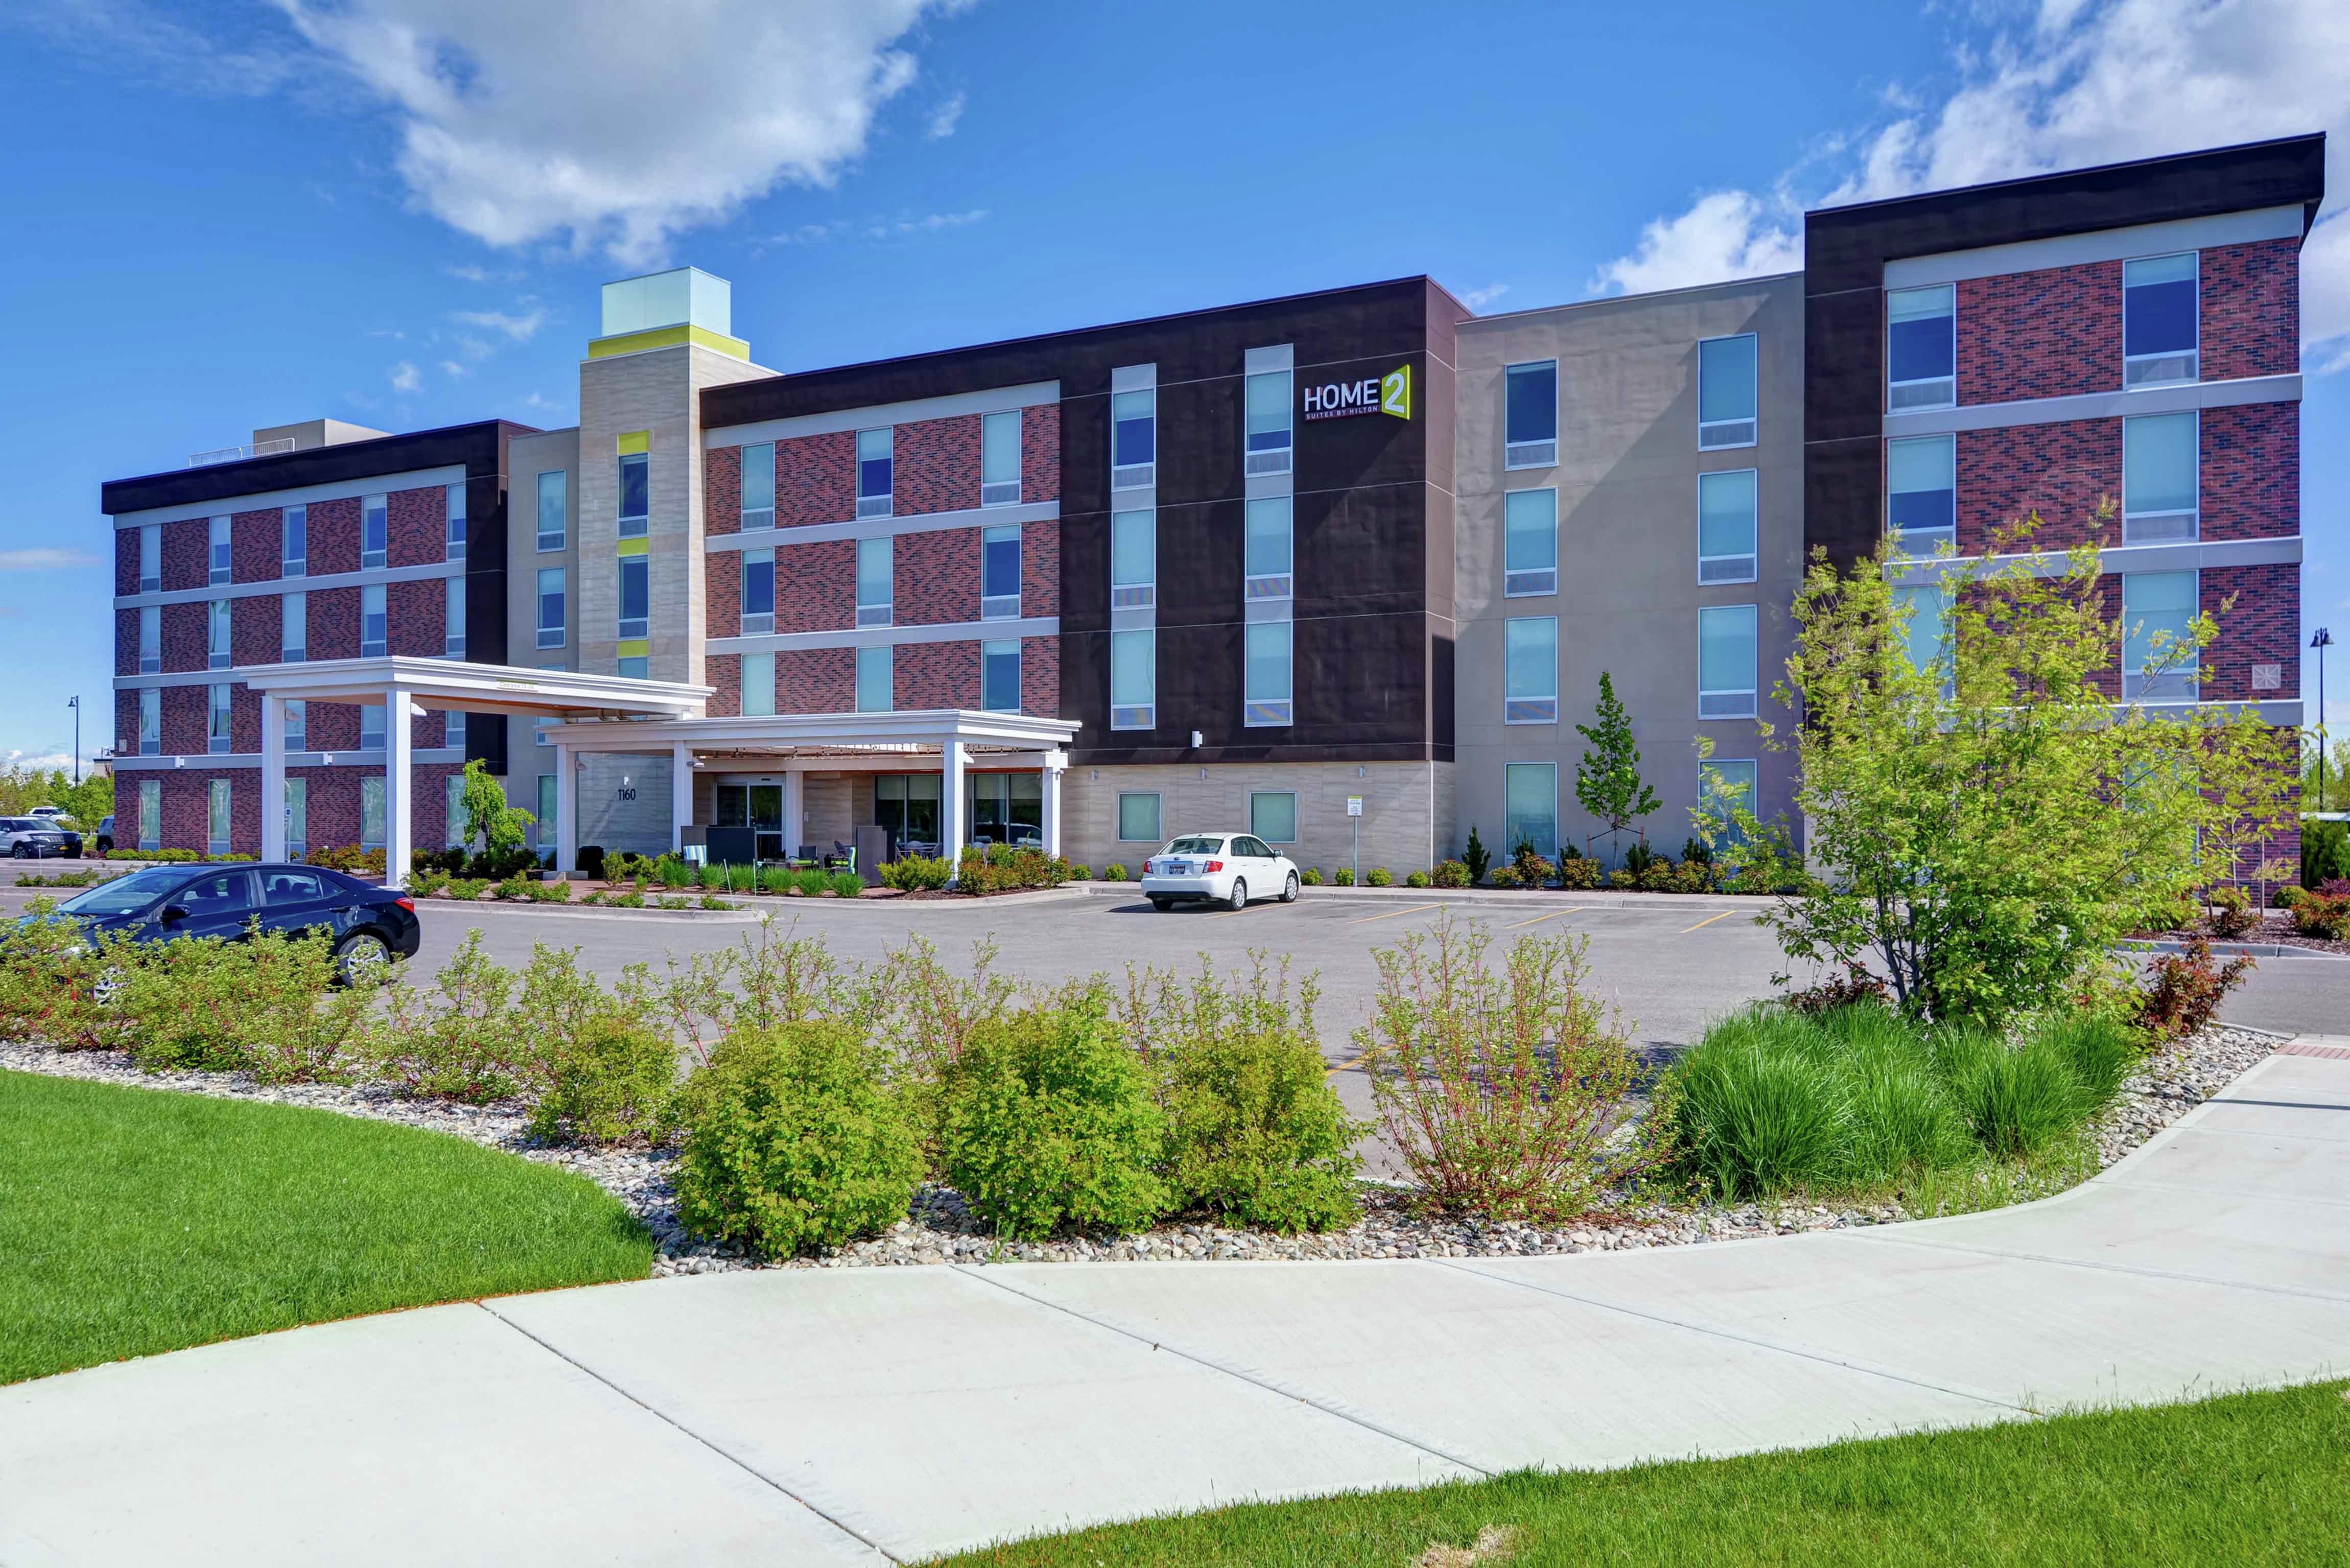 Welcome to the Home2 Suites by Hilton Idaho Falls!